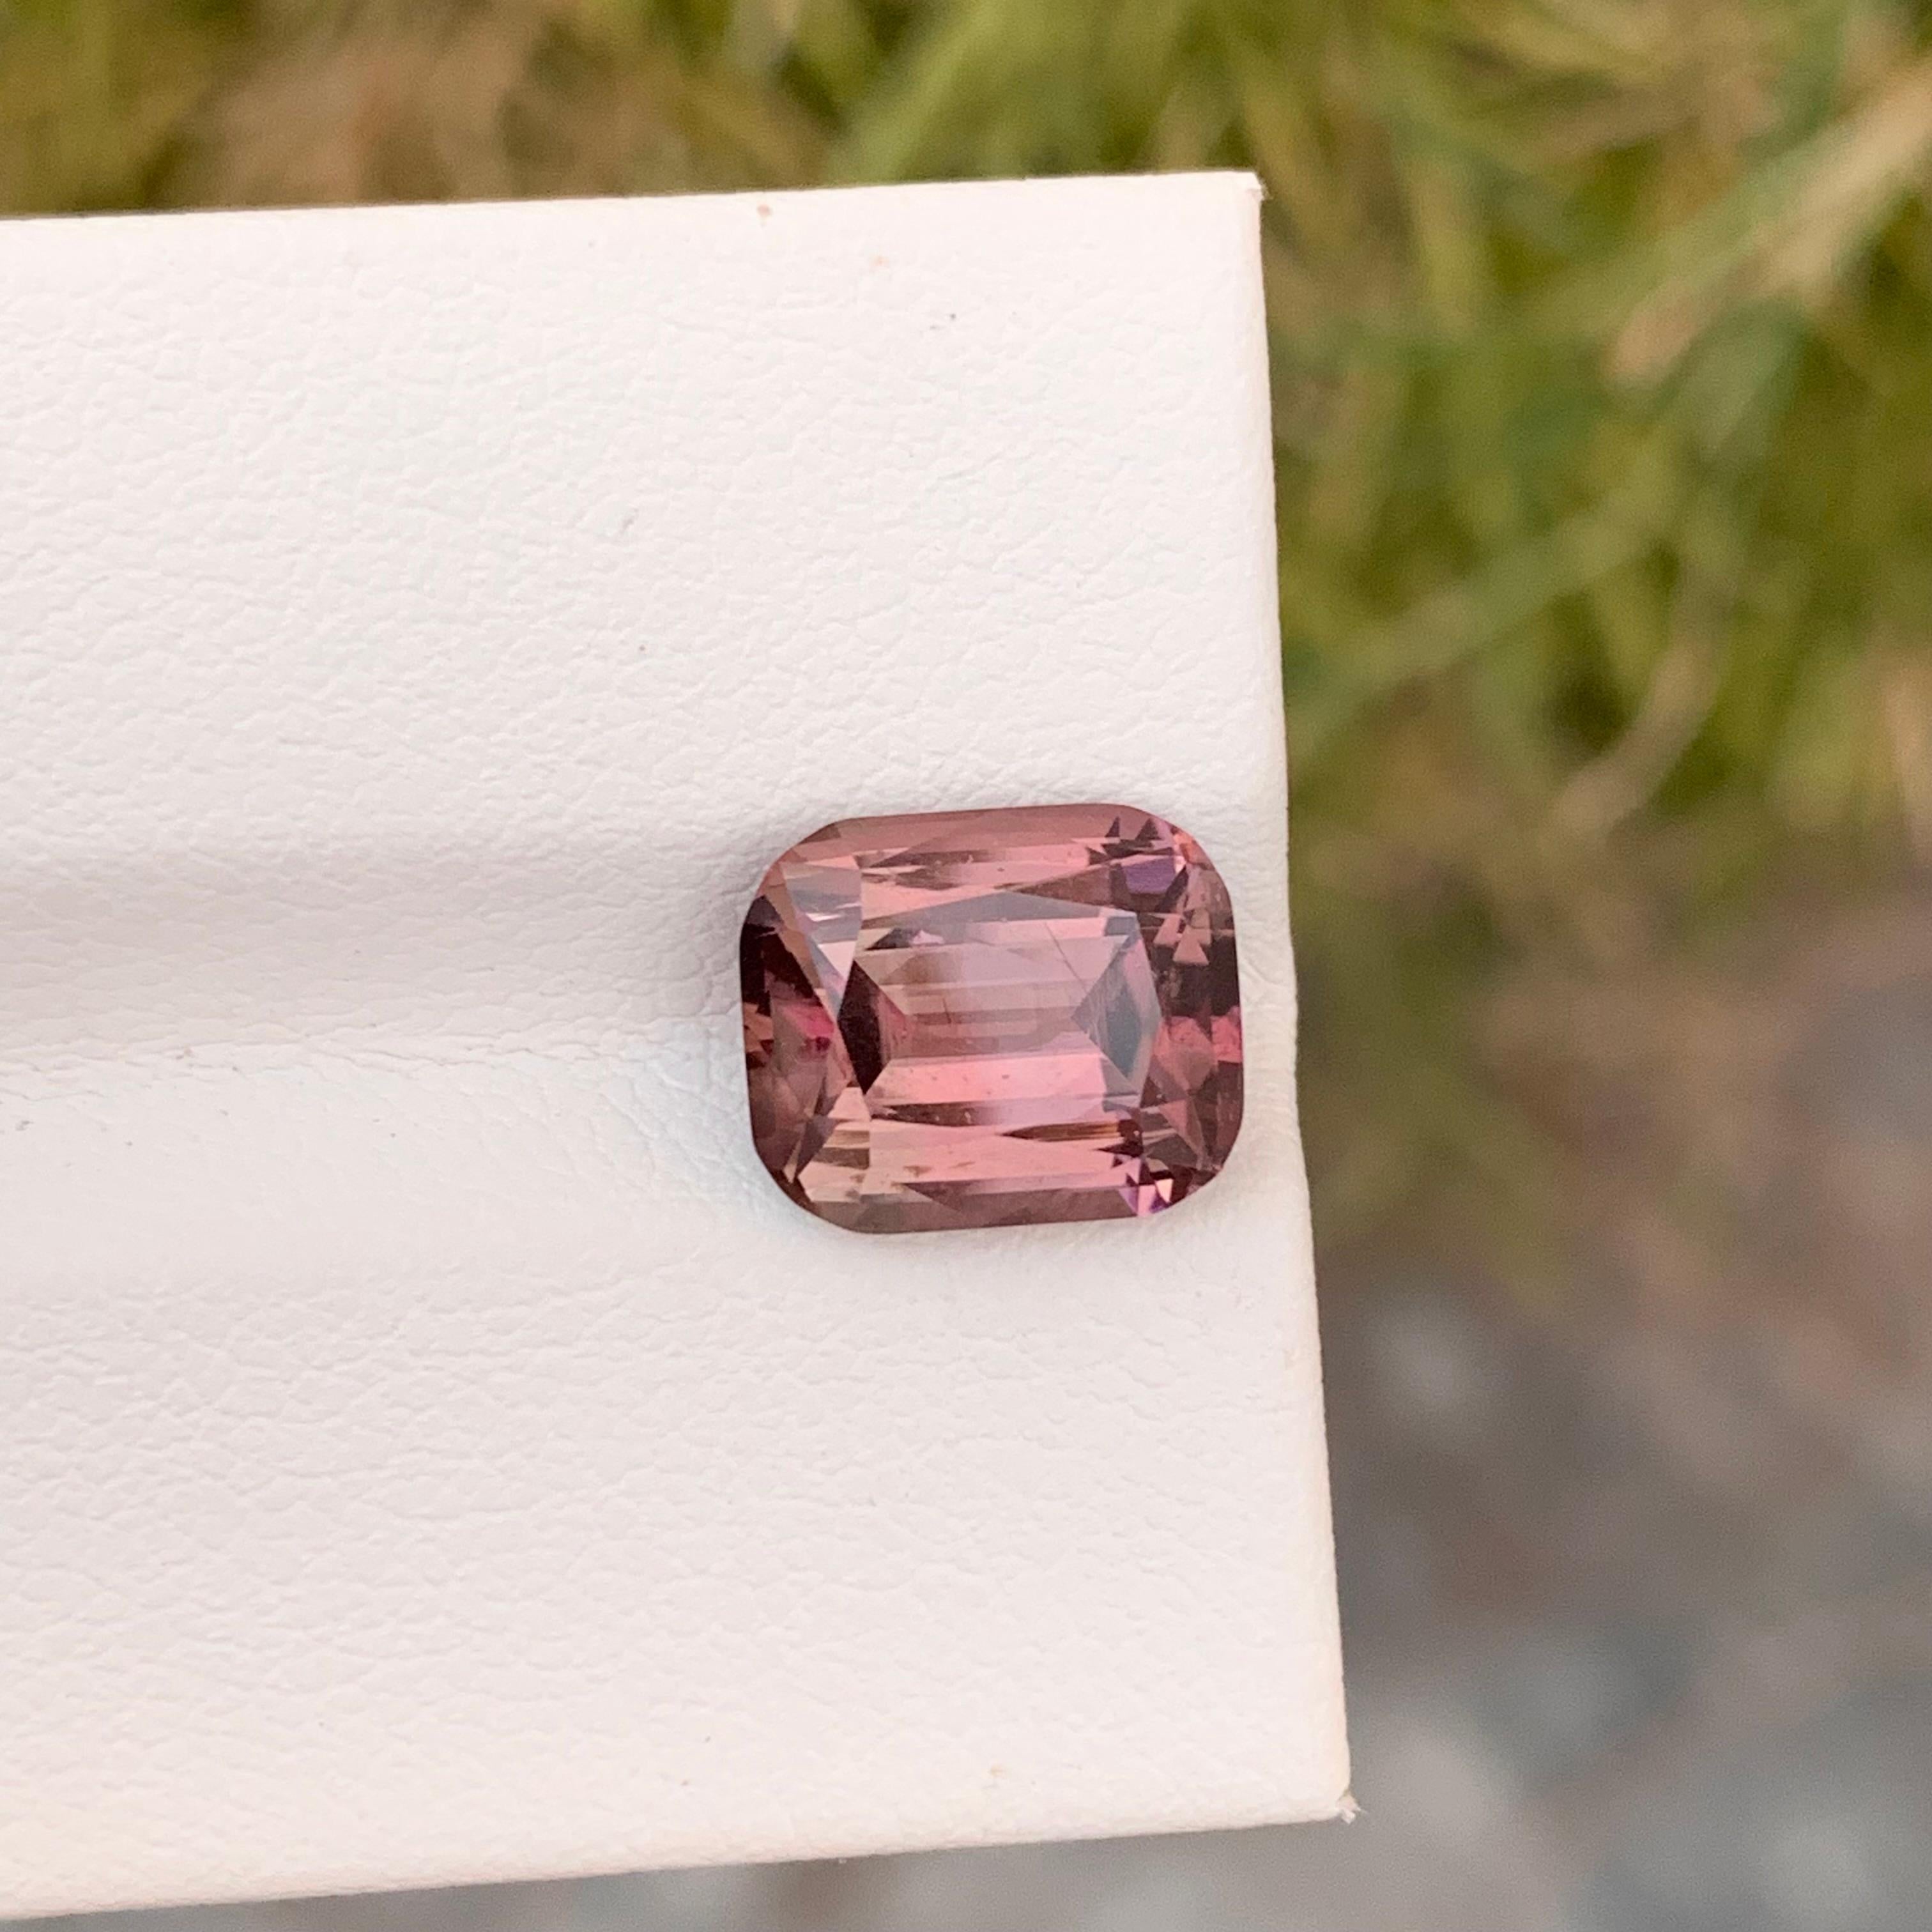 Women's or Men's 3.75 Carat Pretty Loose Peach Pink Tourmaline Cushion Shape Gem From Afghanistan For Sale